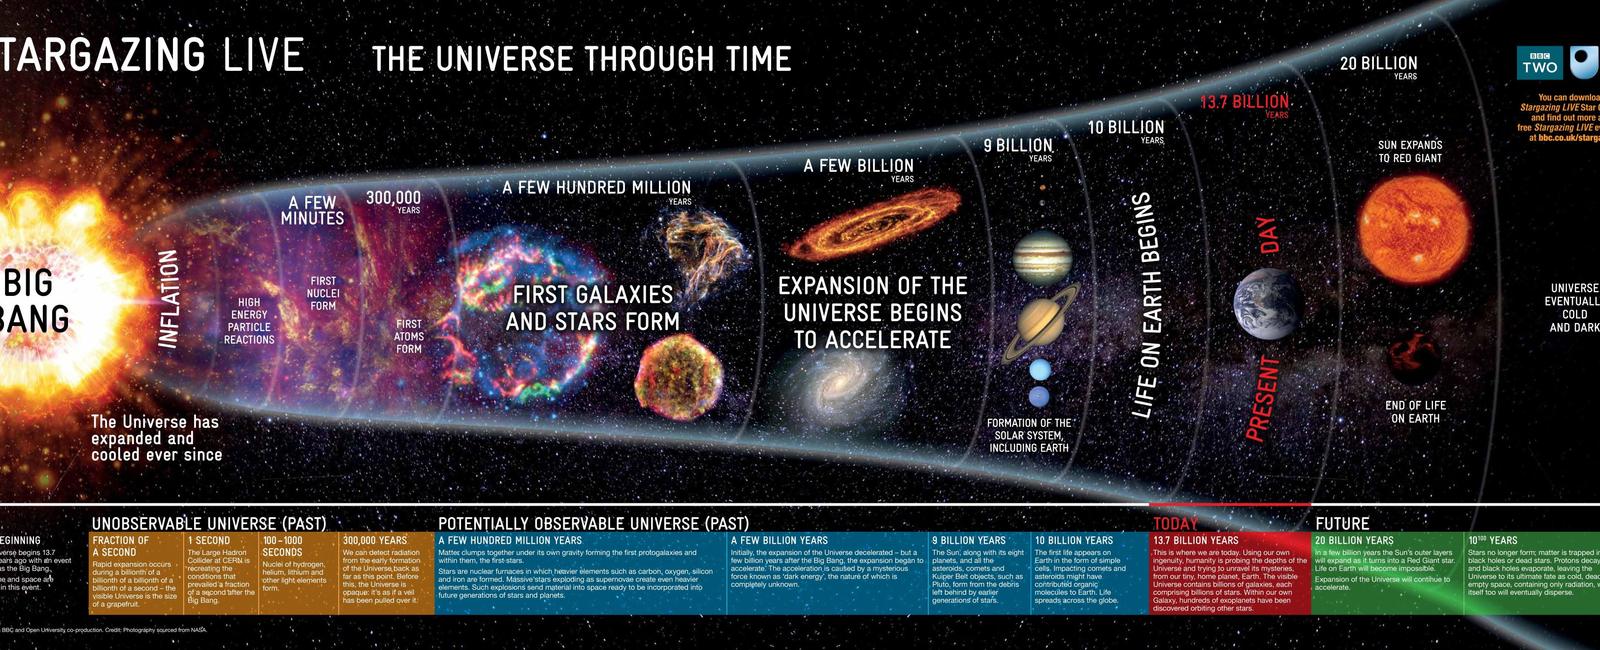 How old is the universe in years 13 8 billion years old